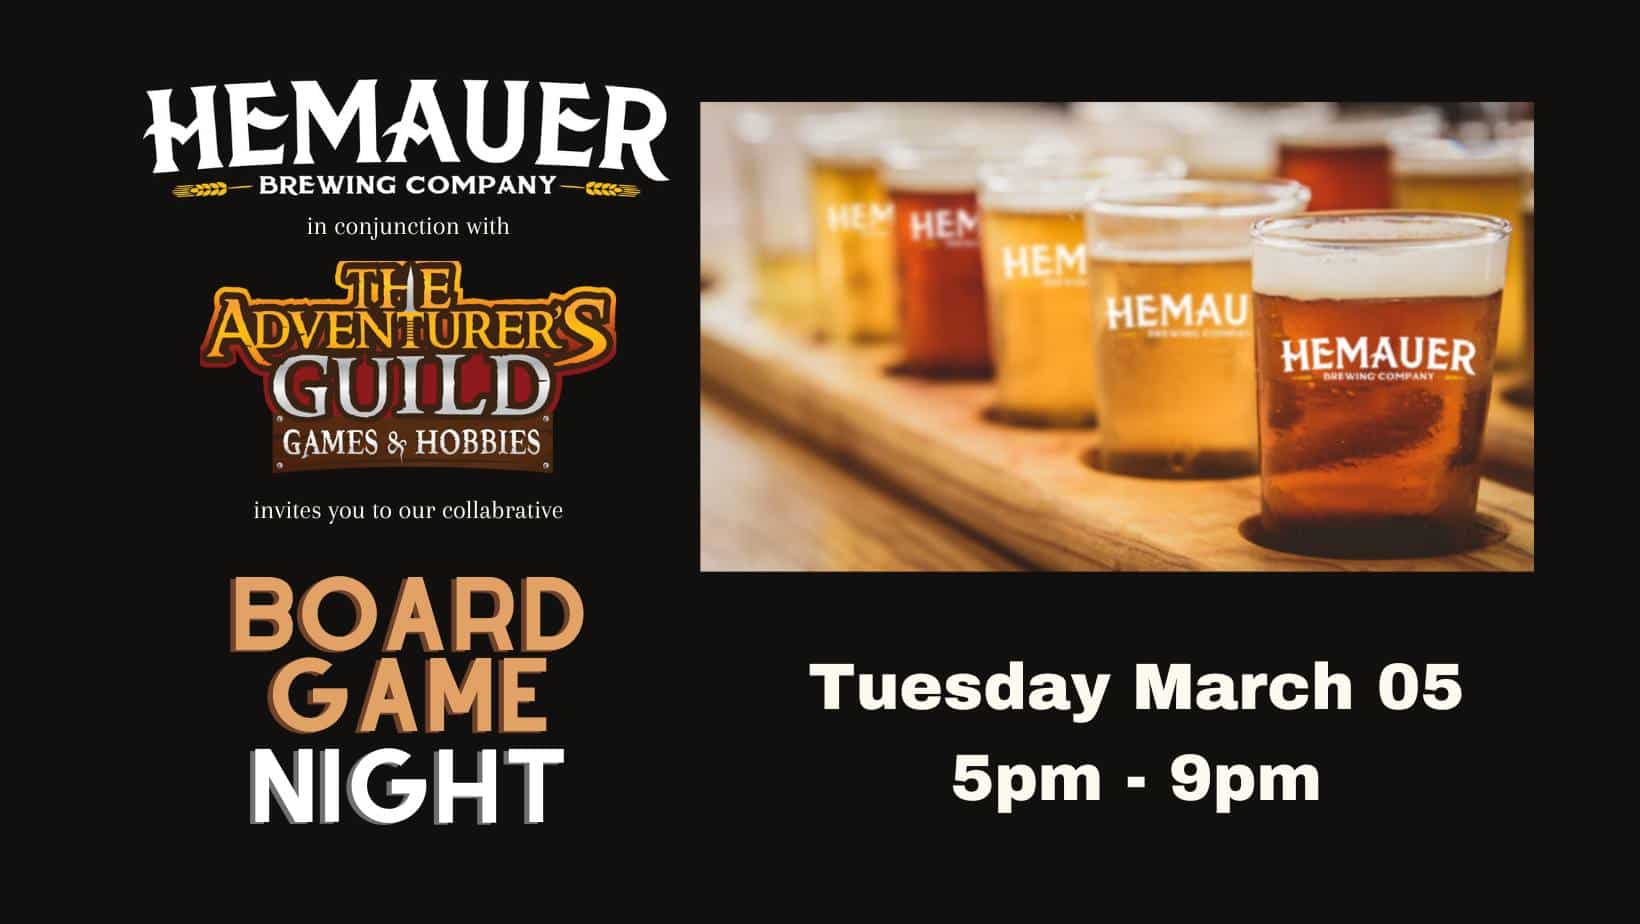 Hemauer Brewing Co. is partnering with The Adventurer's Guild to bring you a board game night at Hemauer. Join us on Tuesday, March 5th, from 5 pm until 9 pm for games, pizza and drinks. The Adventurer's Guild will bring a stack of board games to play, but feel free to bring your own!